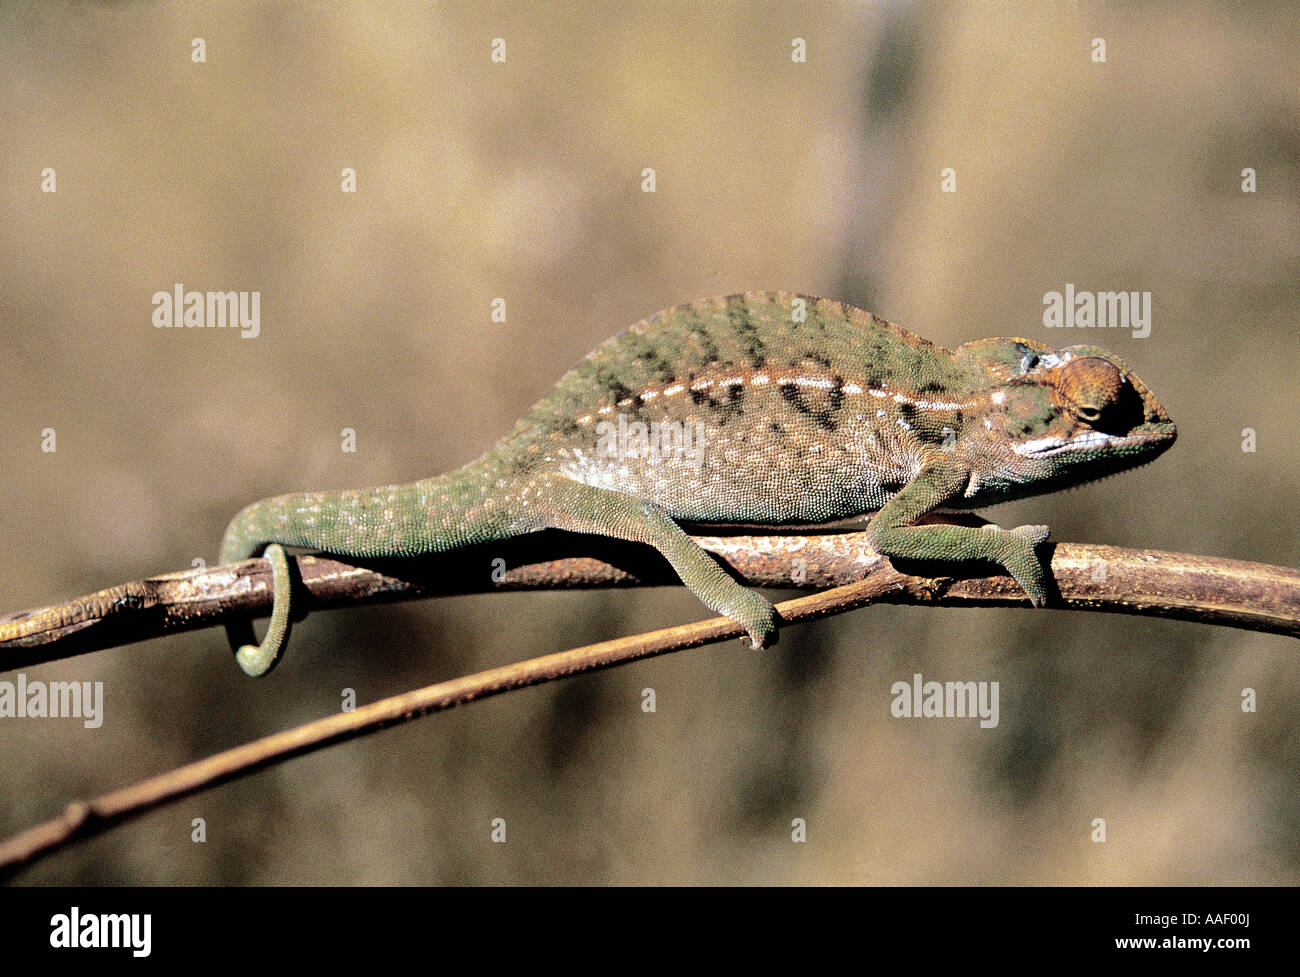 Chameleon Ambalavao using its prehensile tail to grip Central Madagascar Stock Photo